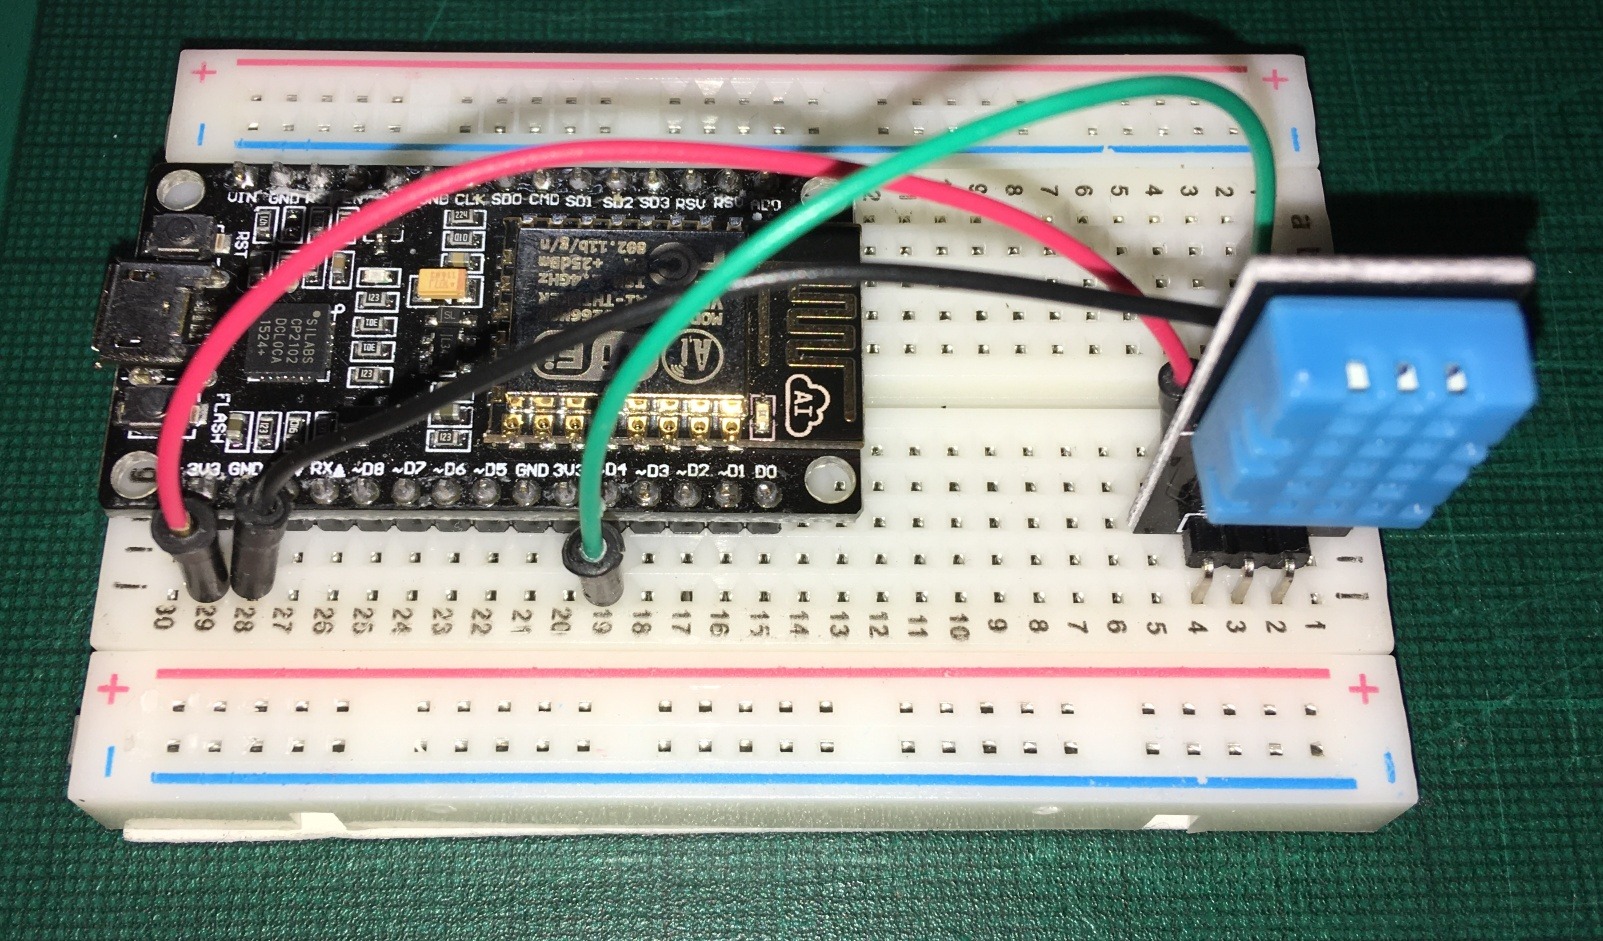 Schematic of the DHT temperature and humidity sensor connected to the NodeMCU